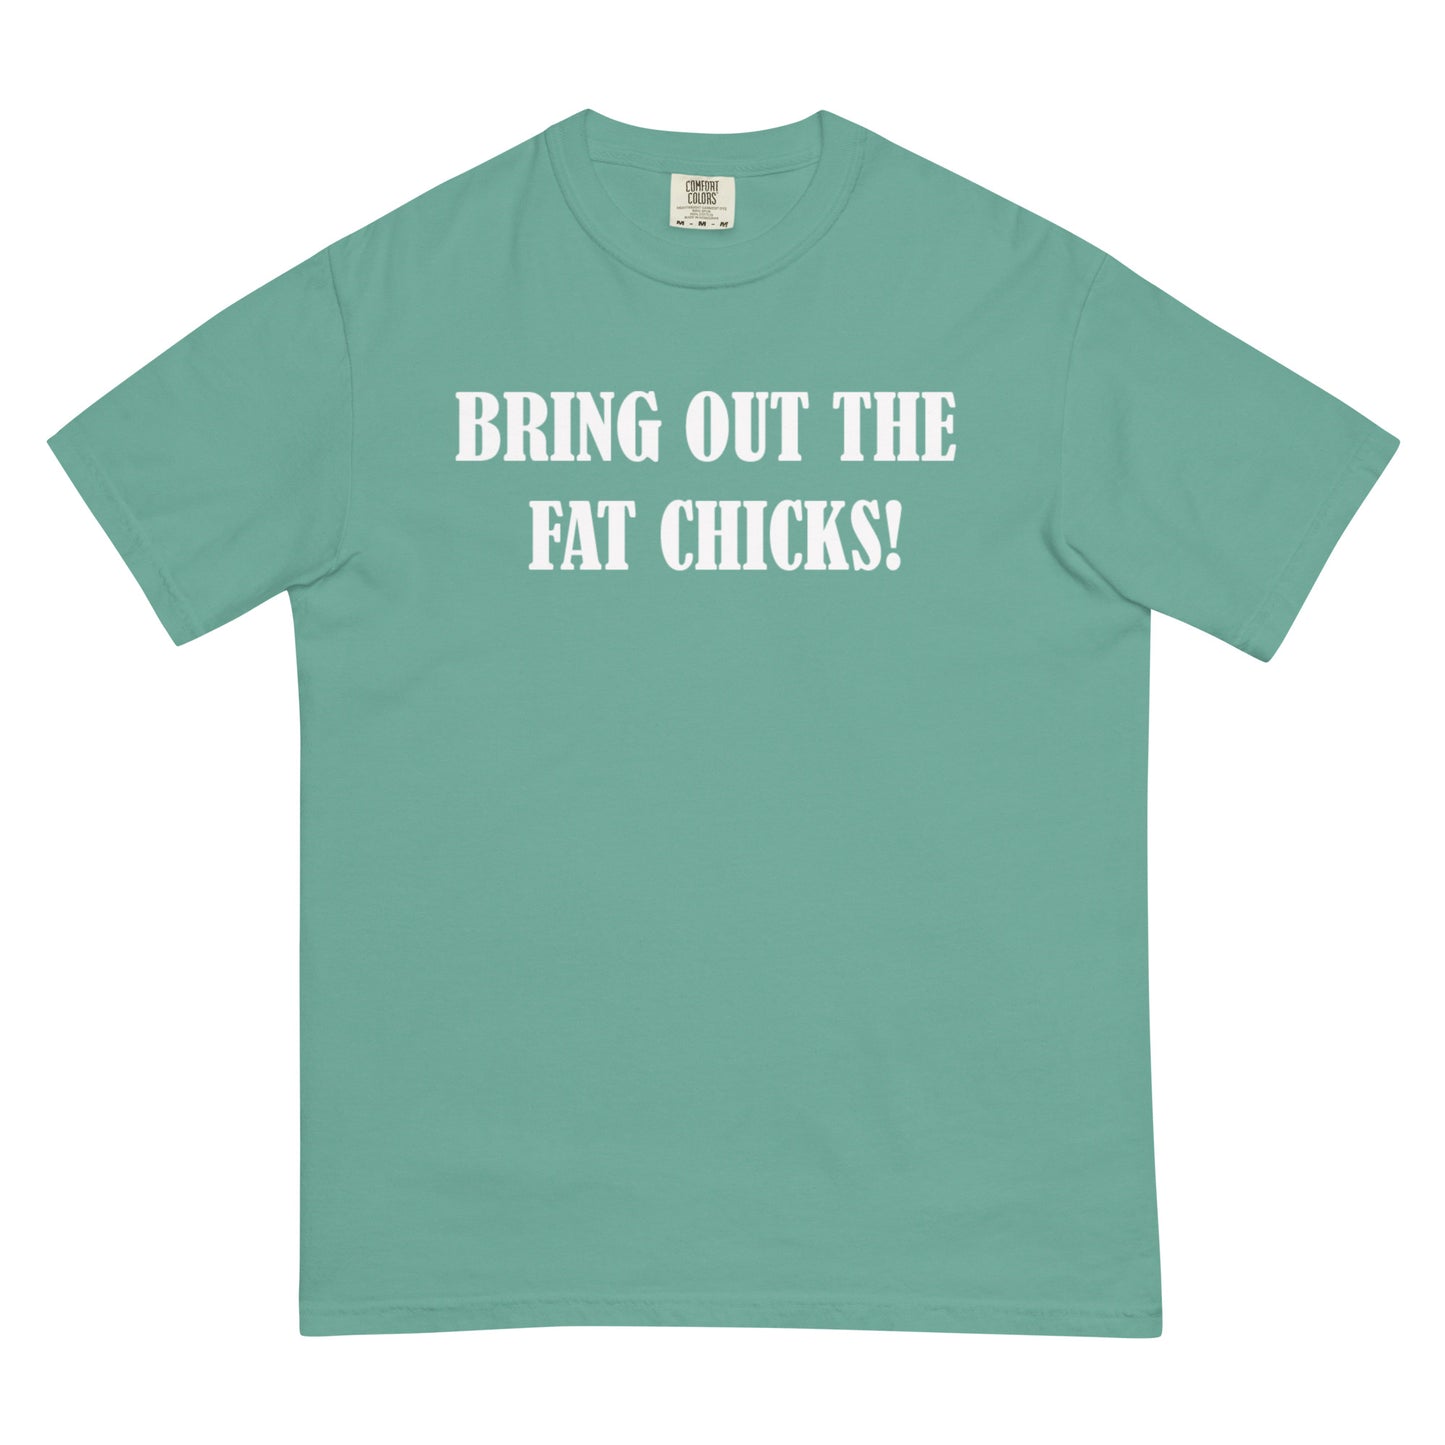 Bring Out The Fat Chicks Premium Tee